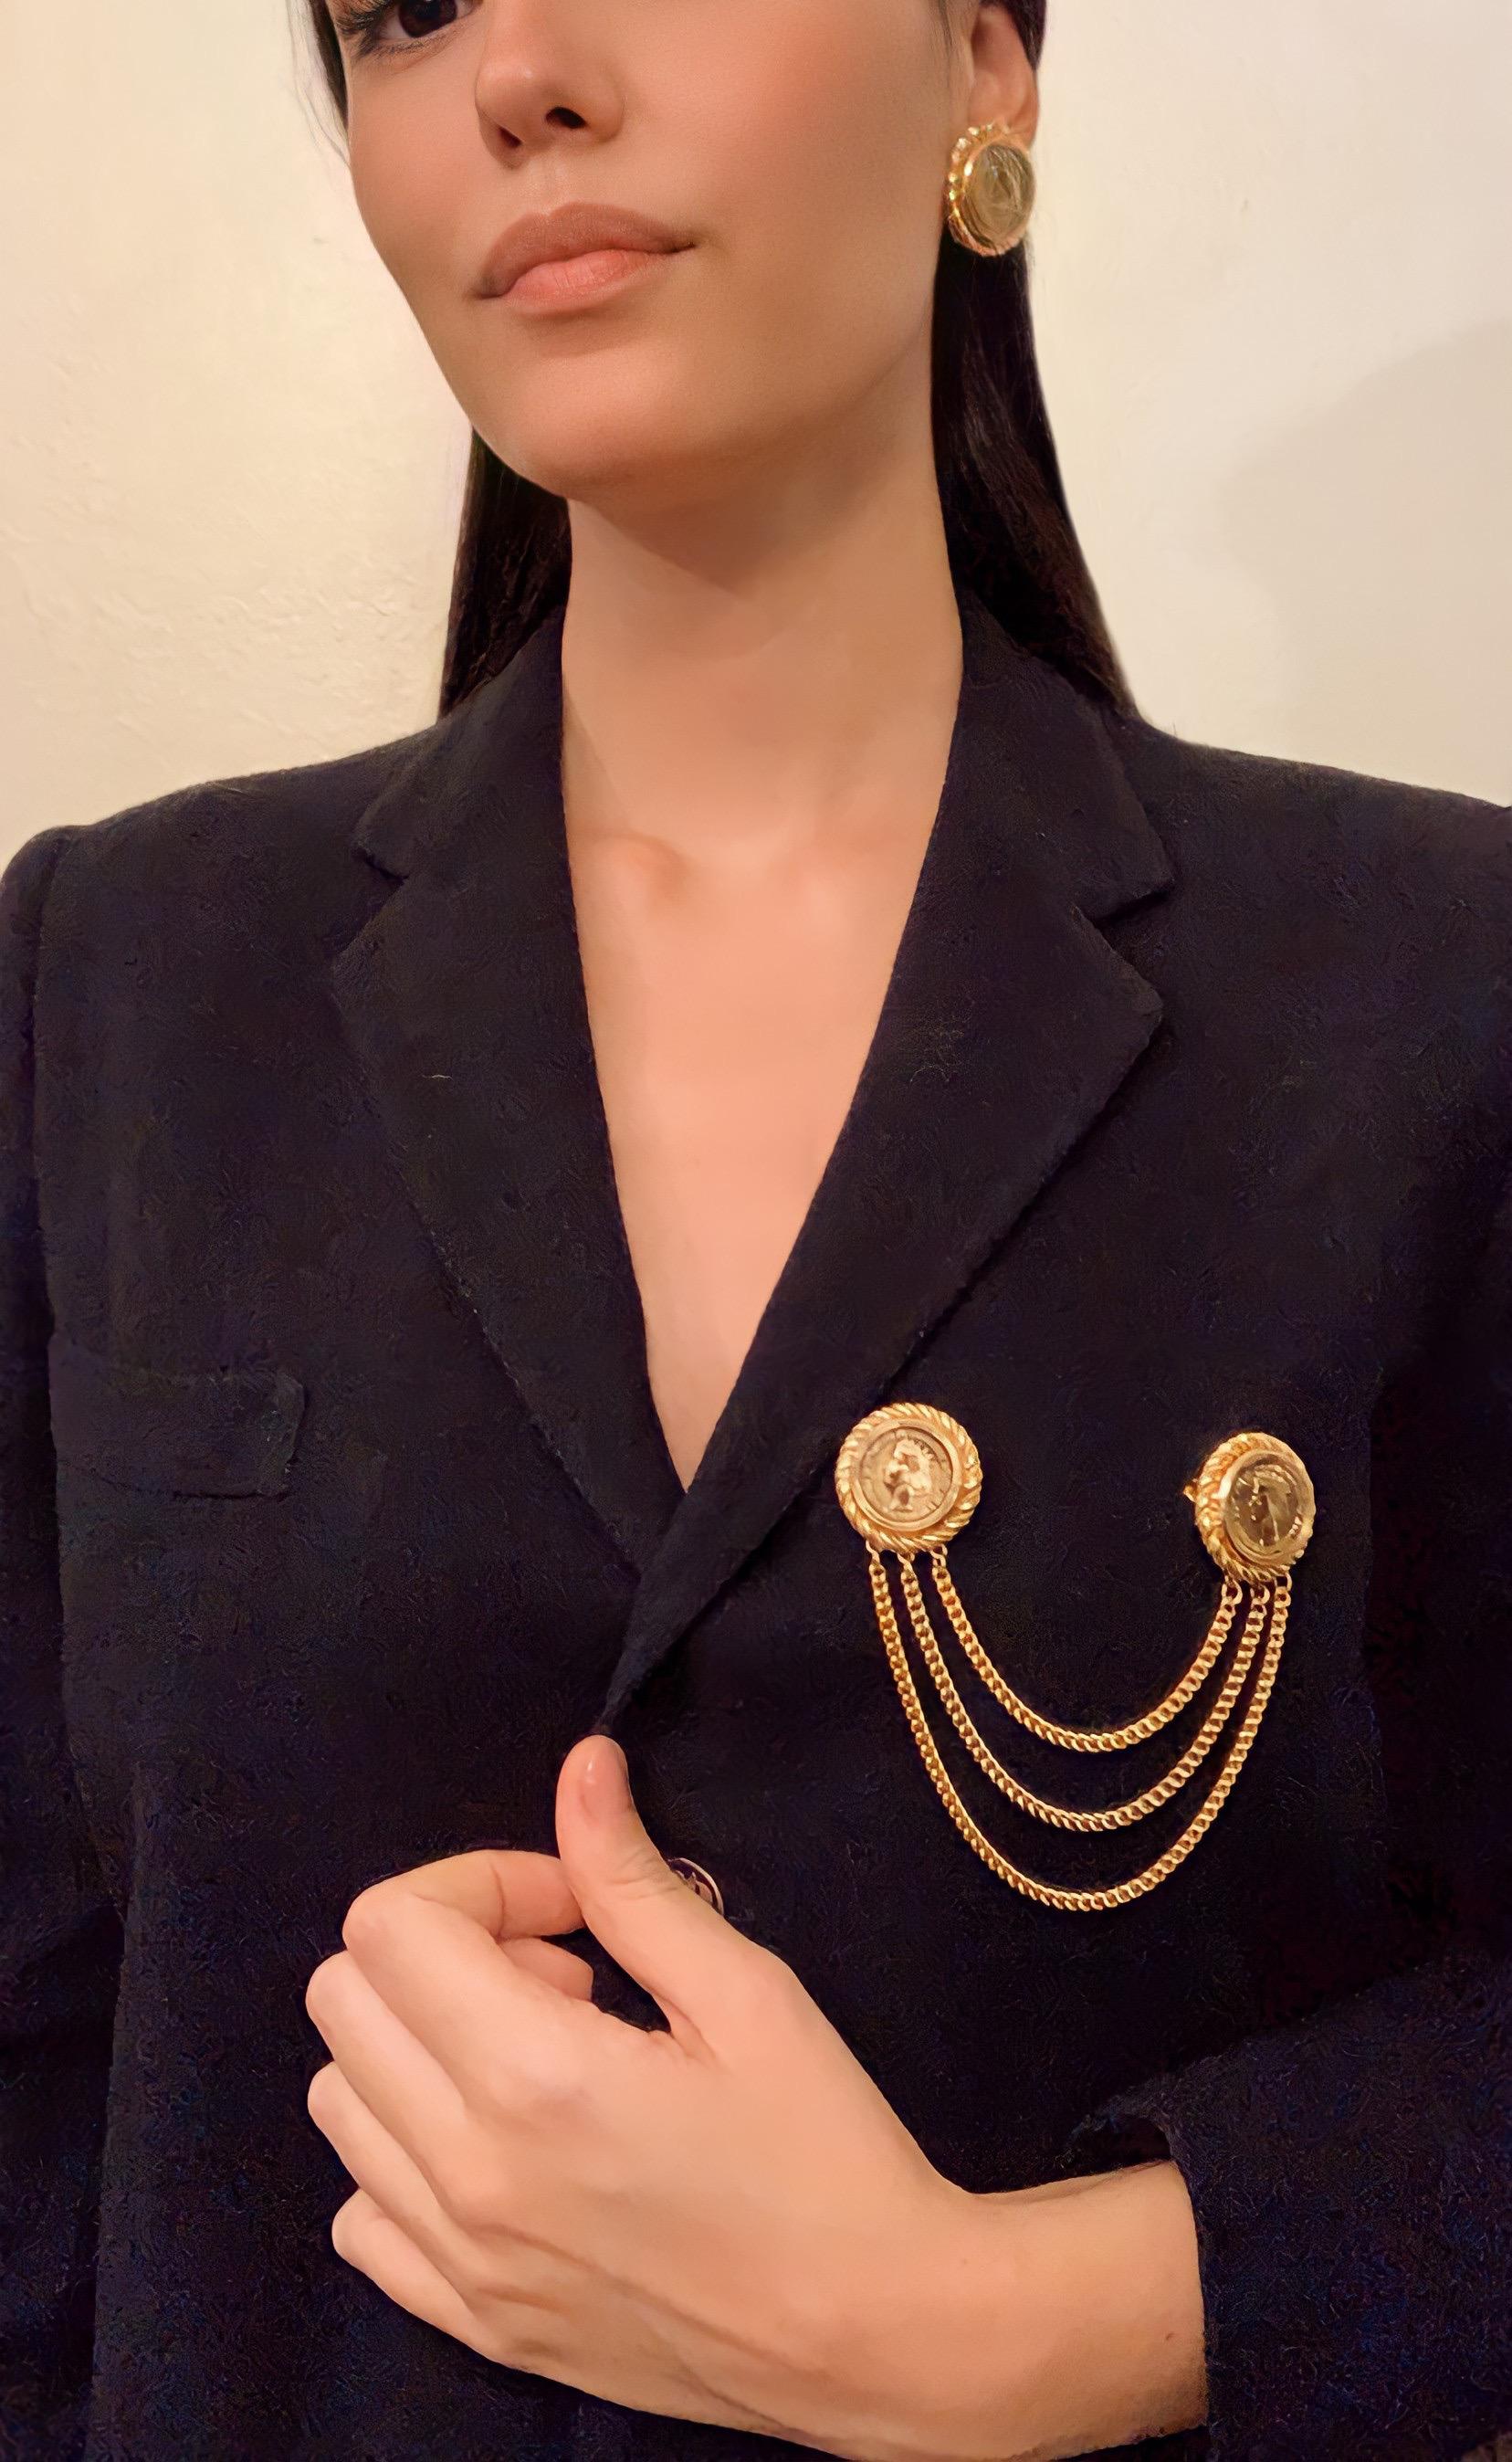 Women's or Men's Gold-Plated Clip Earrings Collar Chain Brooch Pin Set Britain Pound Sterling